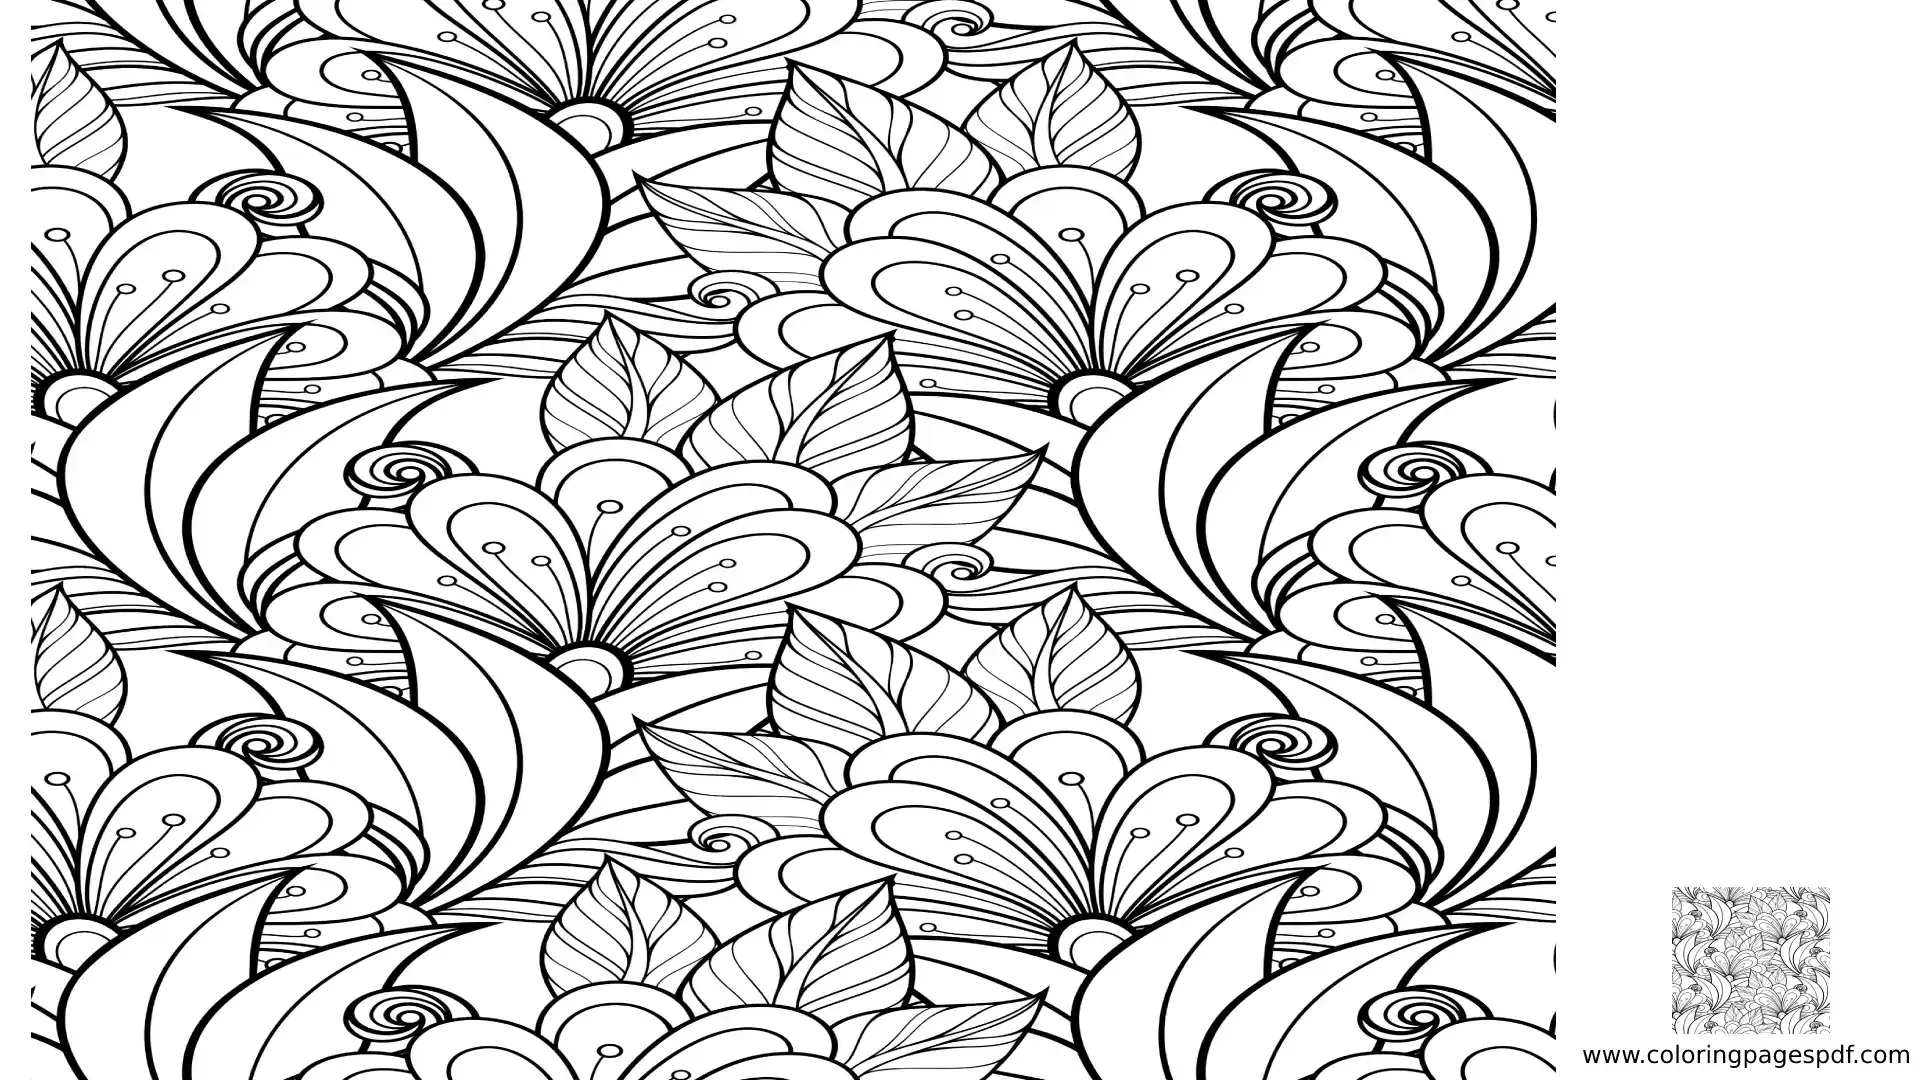 Coloring Pages Of Mandala Made Of Plants